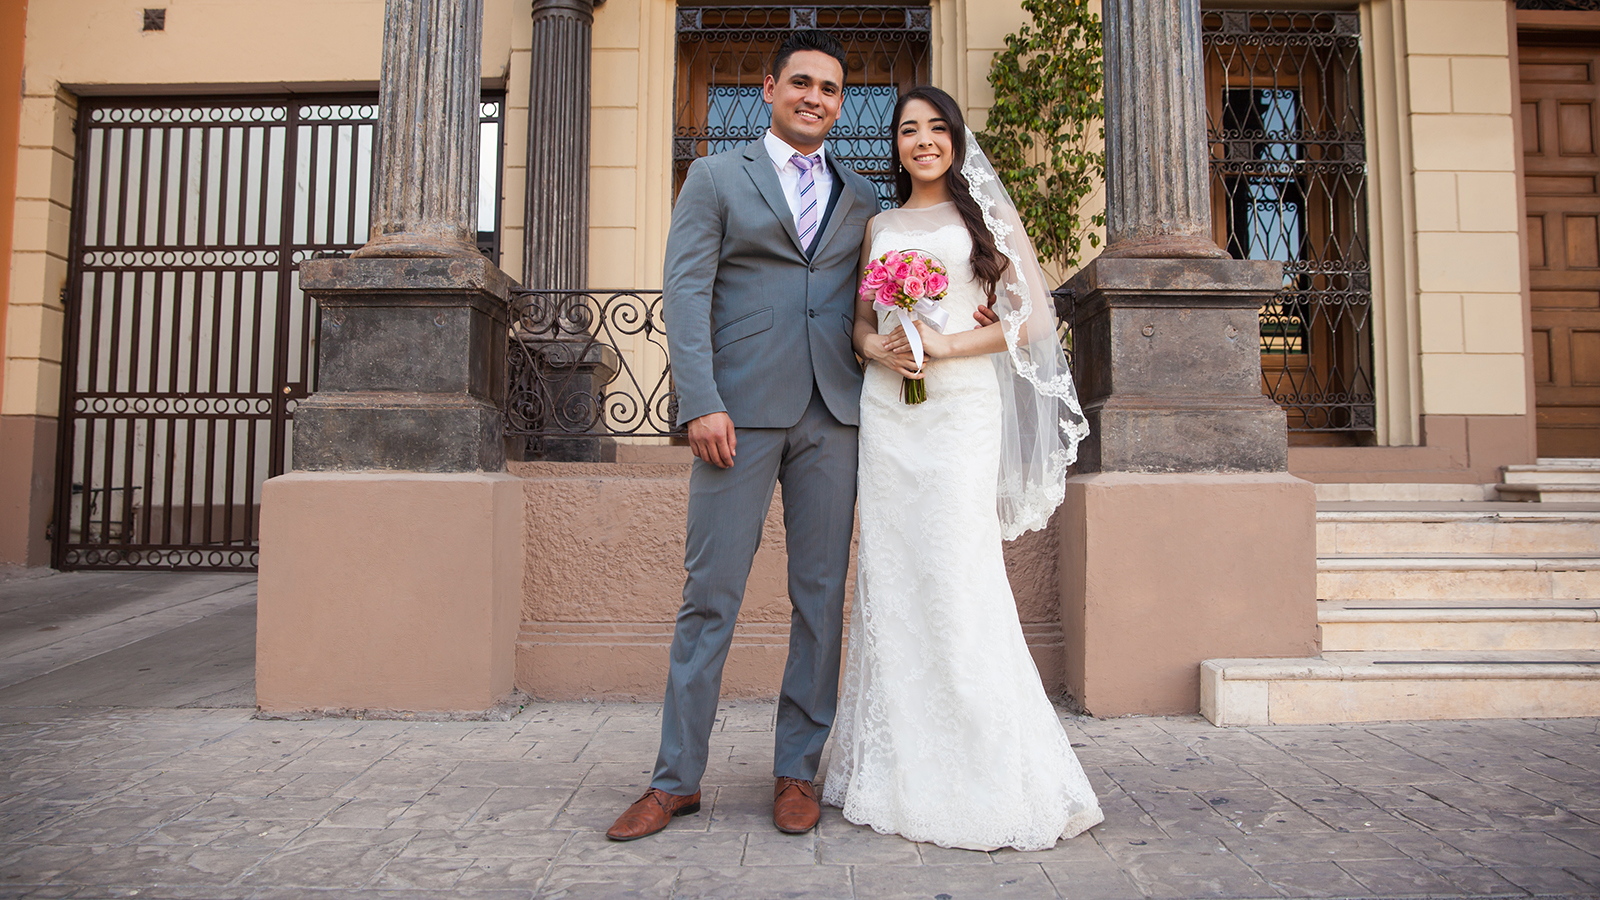 Young Latin bride and groom standing together outside a courthouse on their wedding day